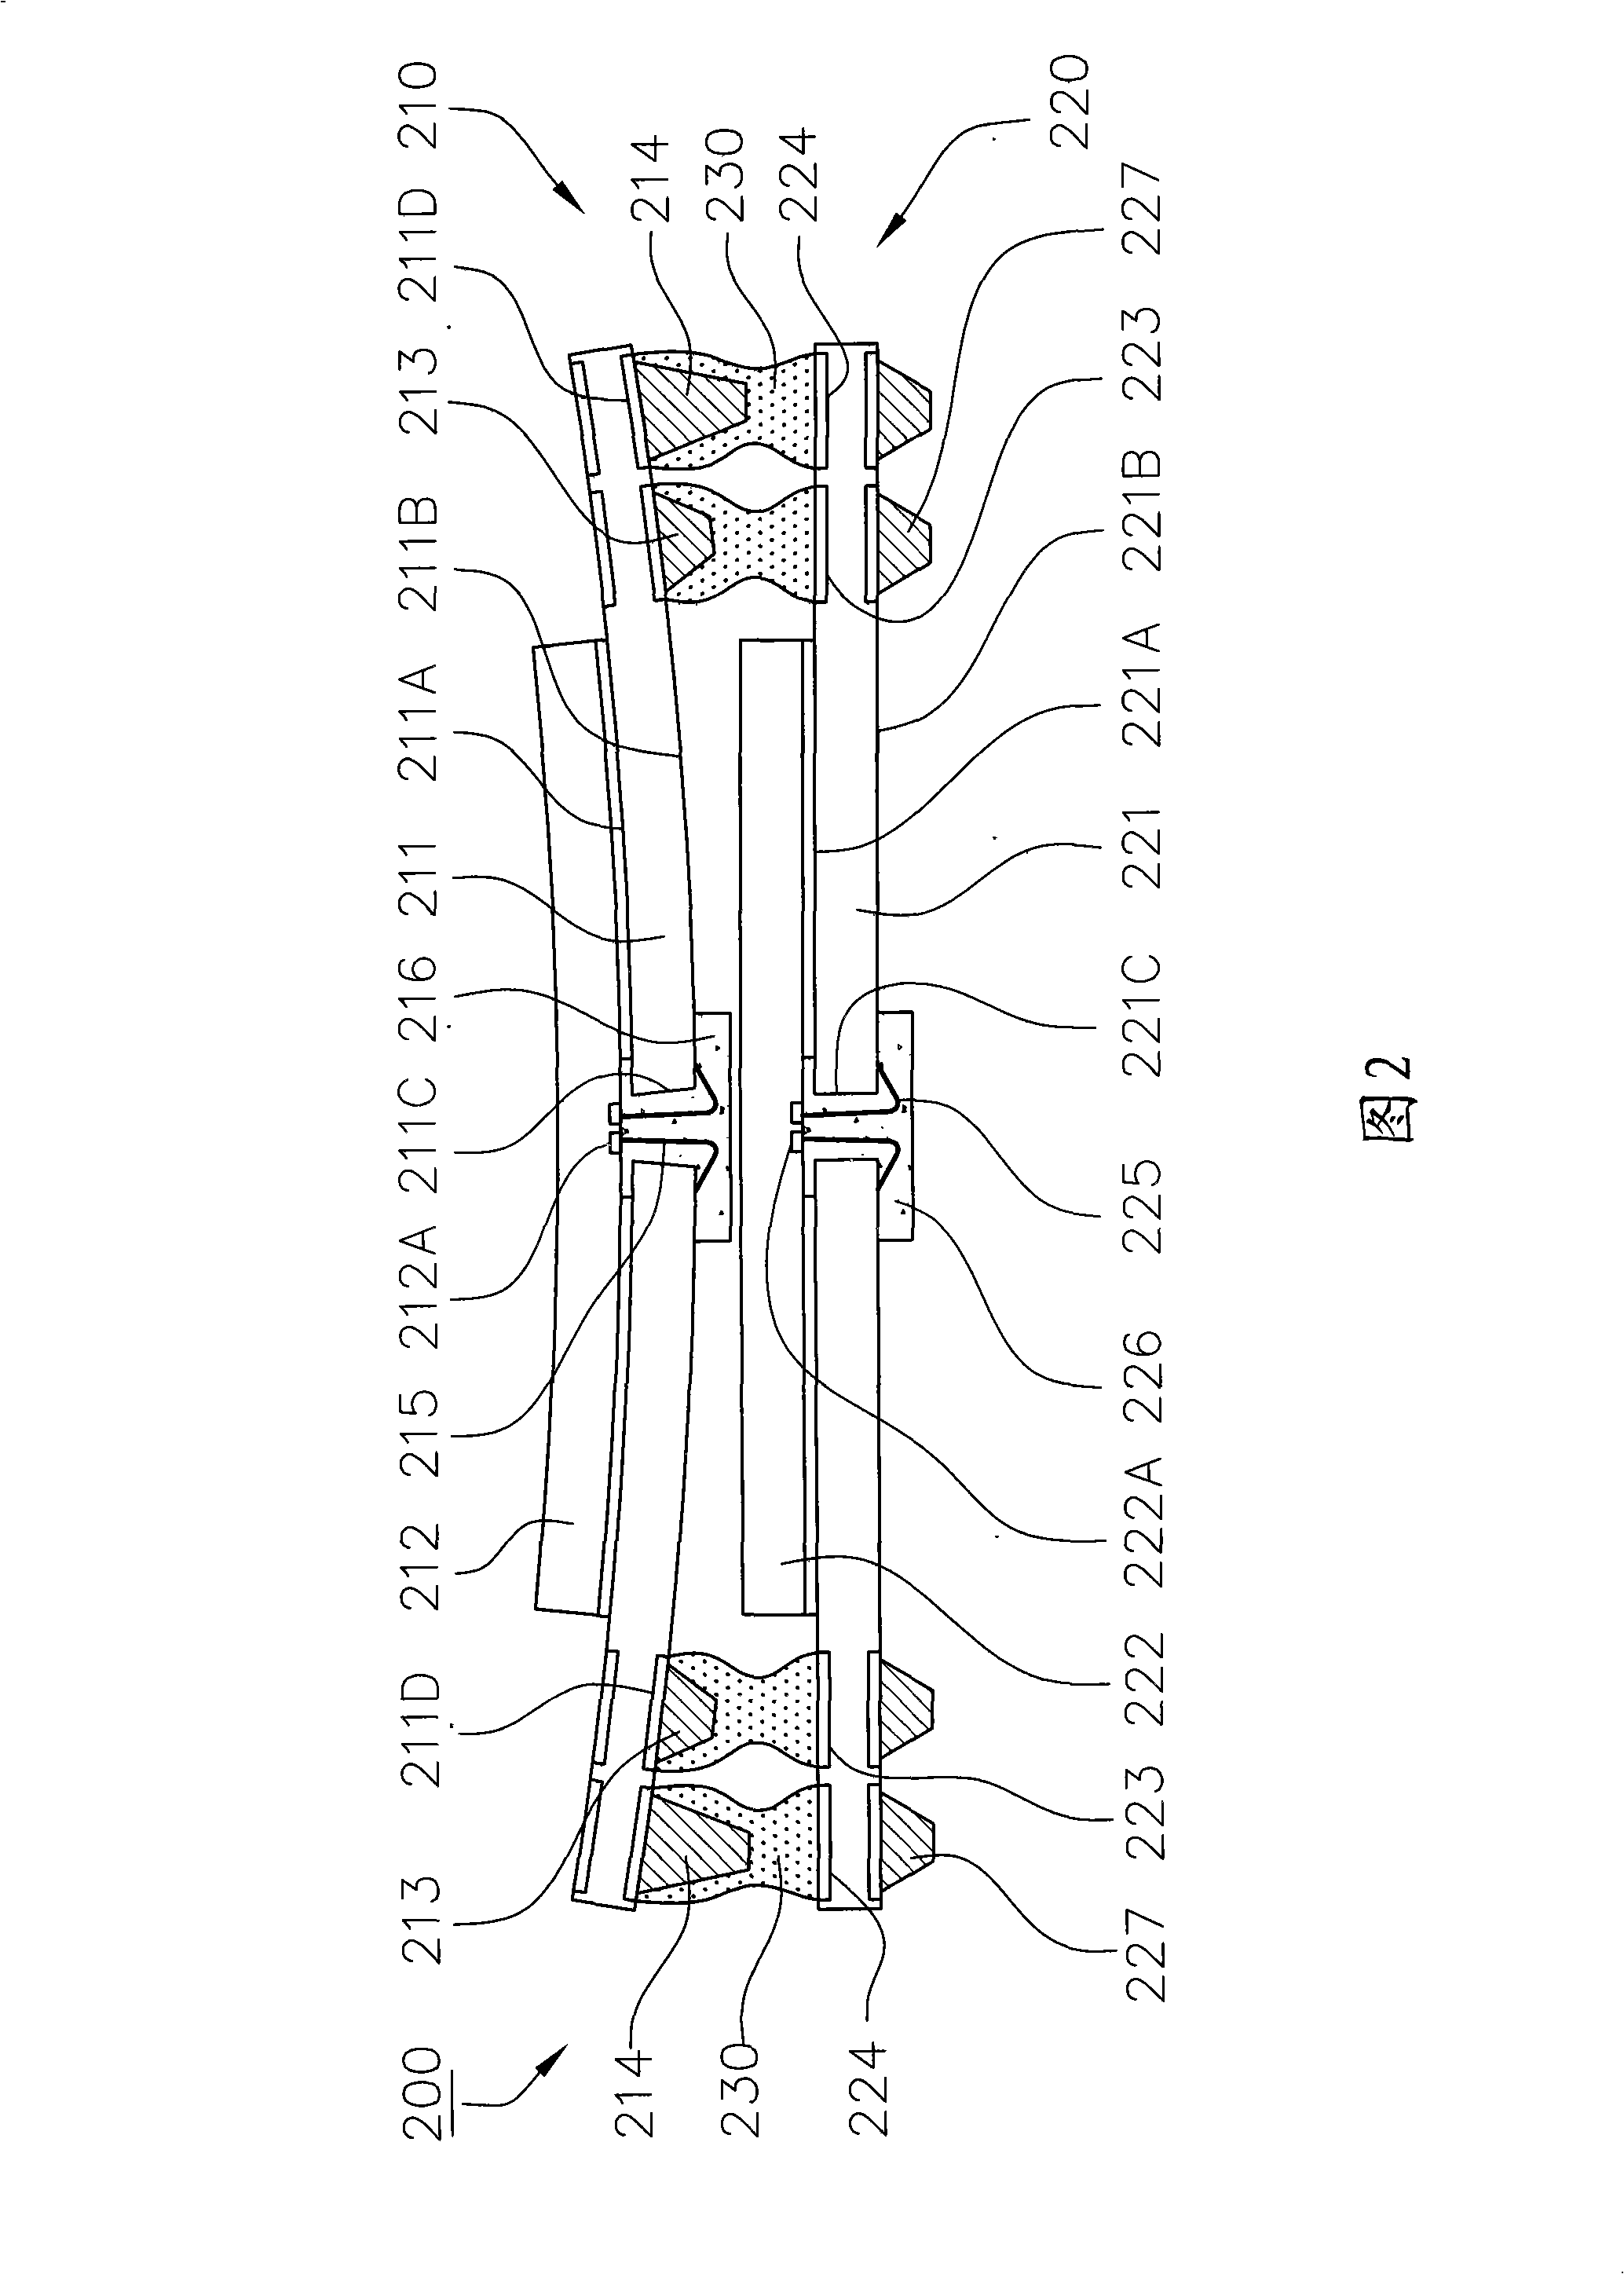 Semi-conductor encapsulation connecting construction avoiding welding defect induced by warp of substrate